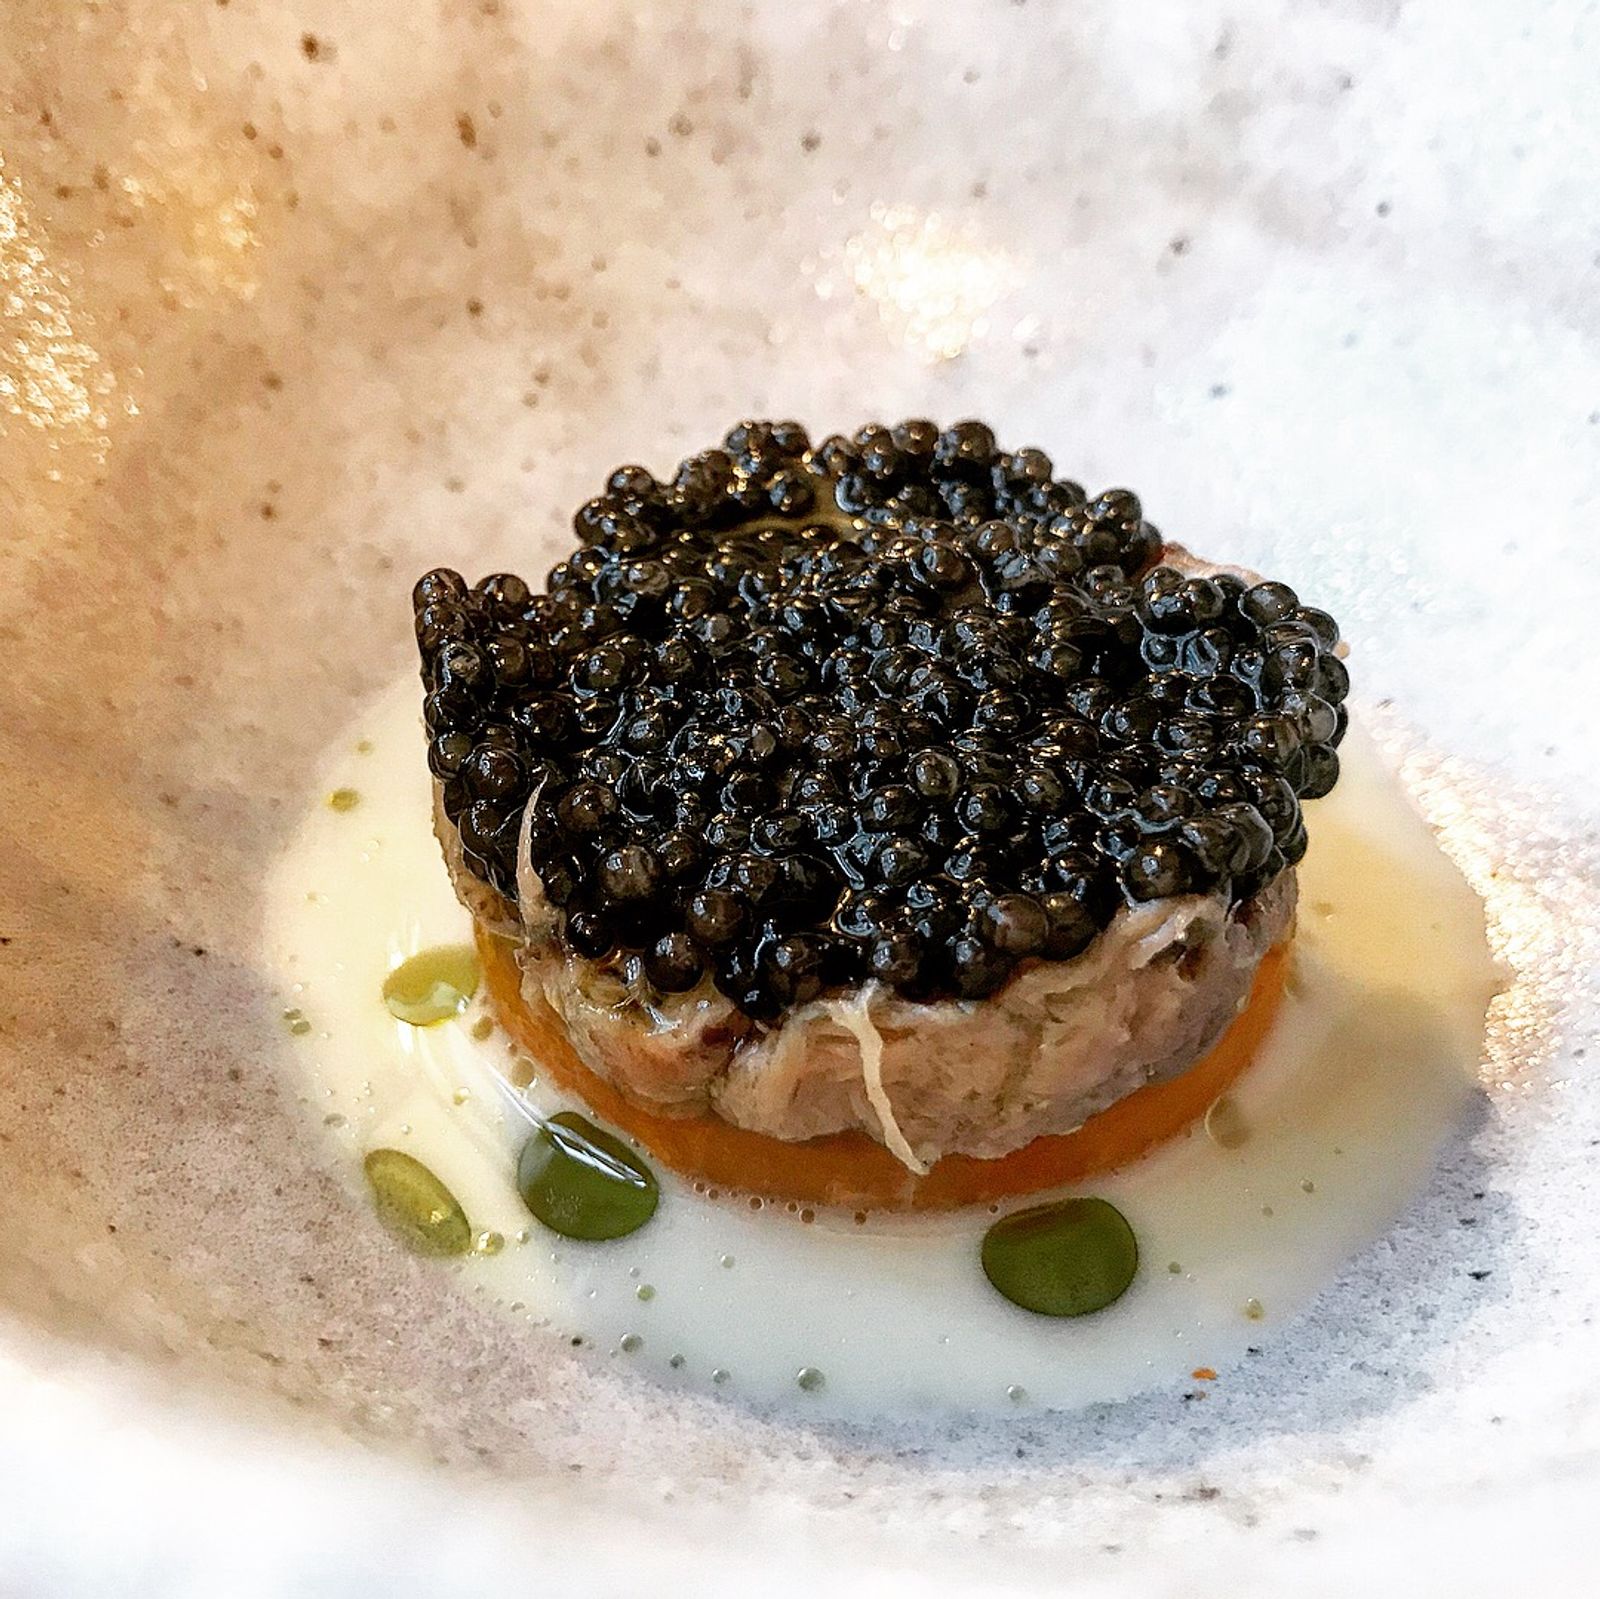 Pigs head with caviar - The Granary Newtown